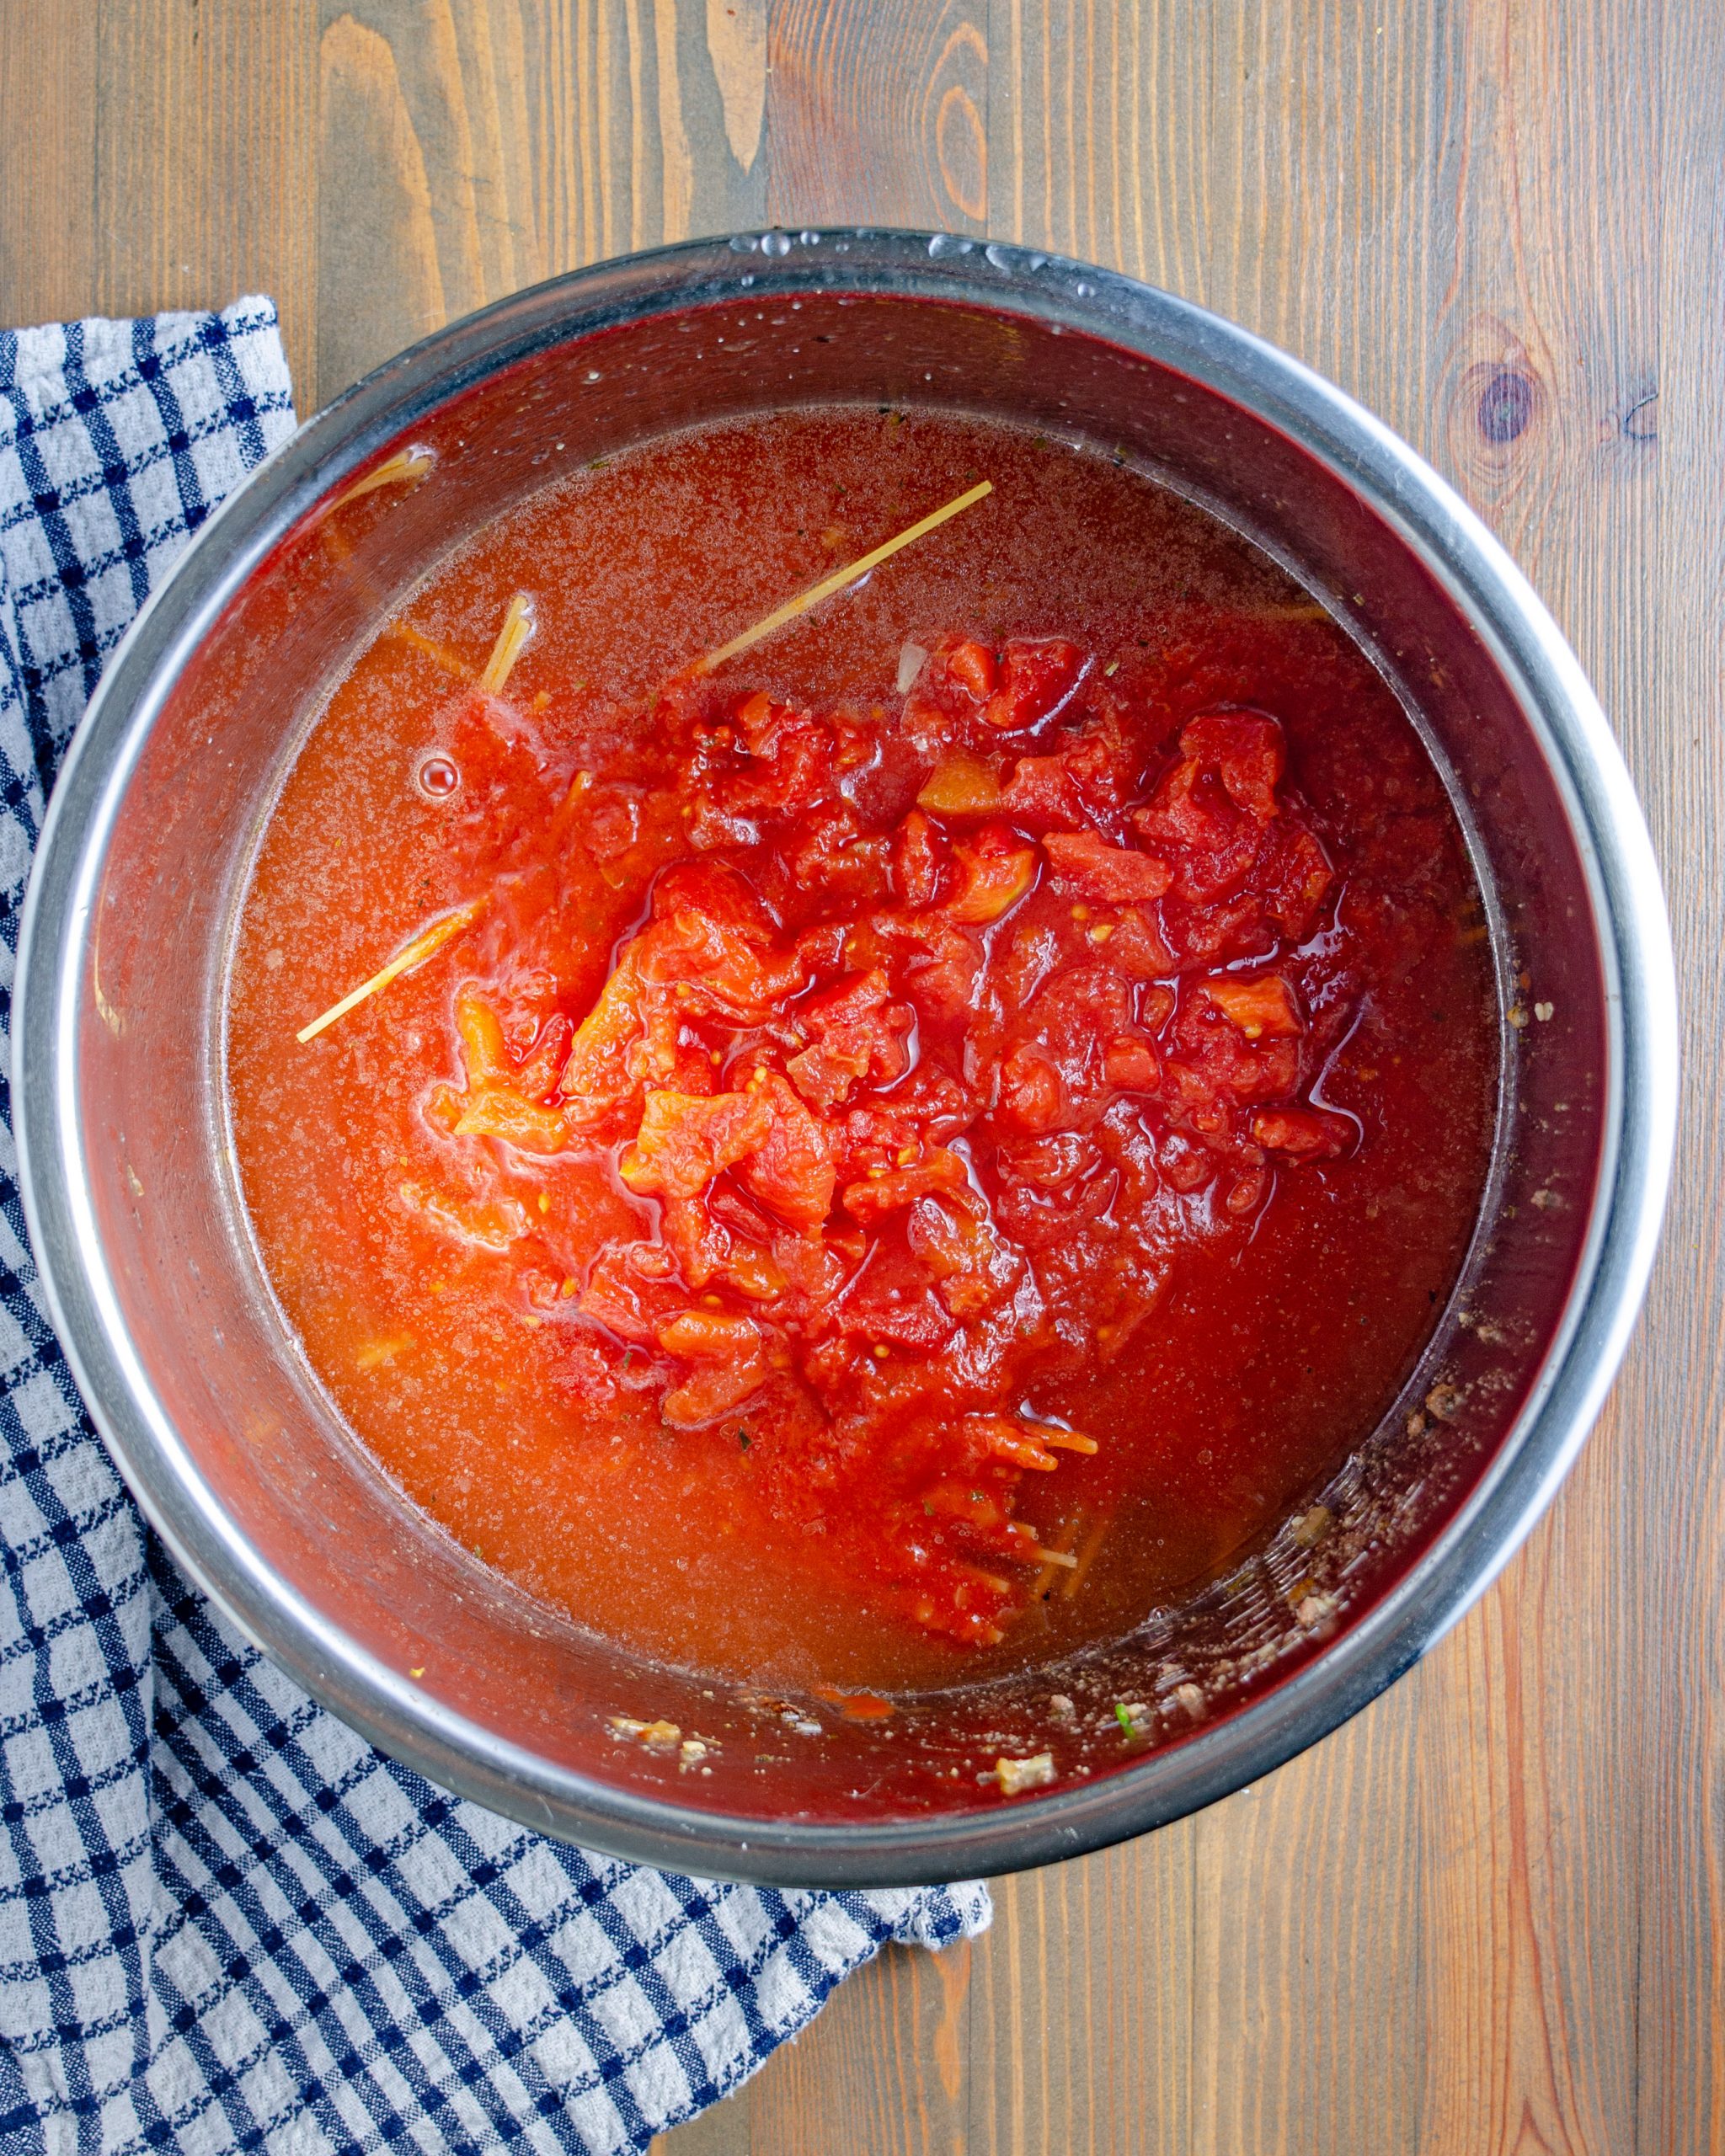 Cover the spaghetti noodles completely with the pasta sauce, diced tomatoes and remaining water. Be sure the noodles are submerged completely. 